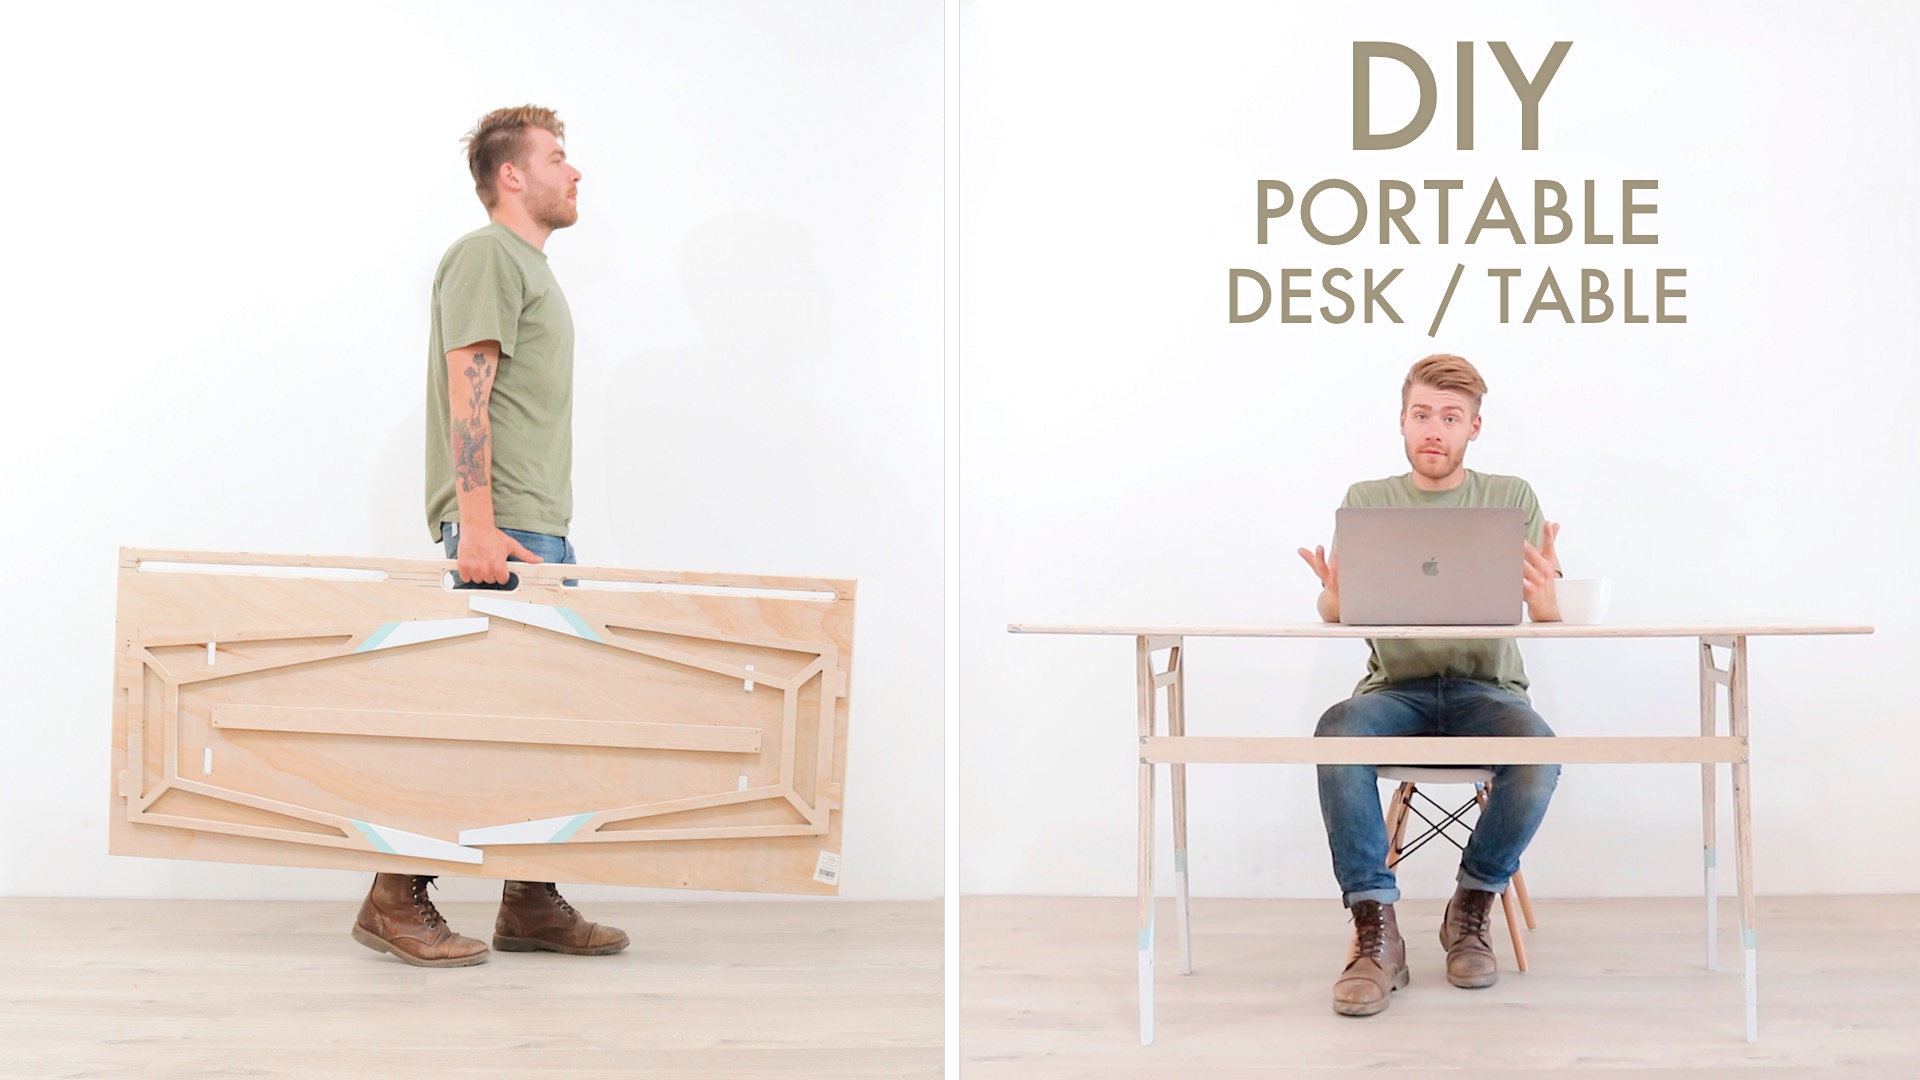  How to build a Portable Desk From a single sheet of 3/4” Plywood by: Mike Montgomery | Modern Builds 